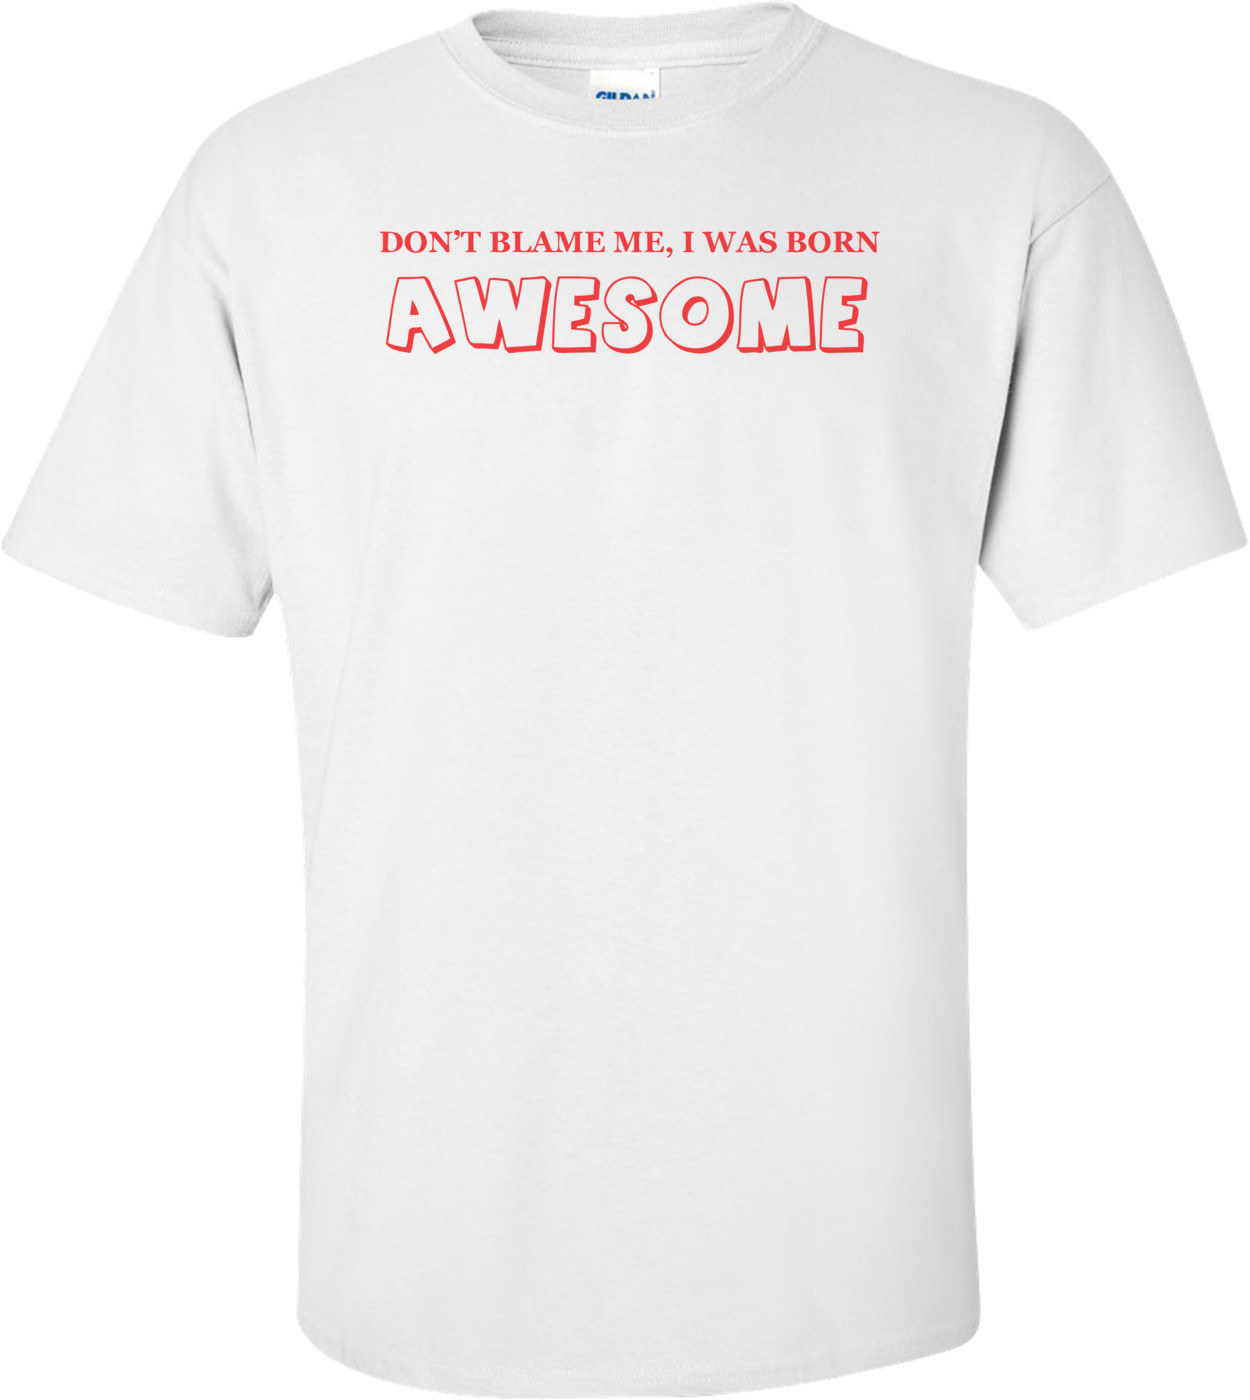 Don't Blame Me I Was Born Awesome T-shirt 